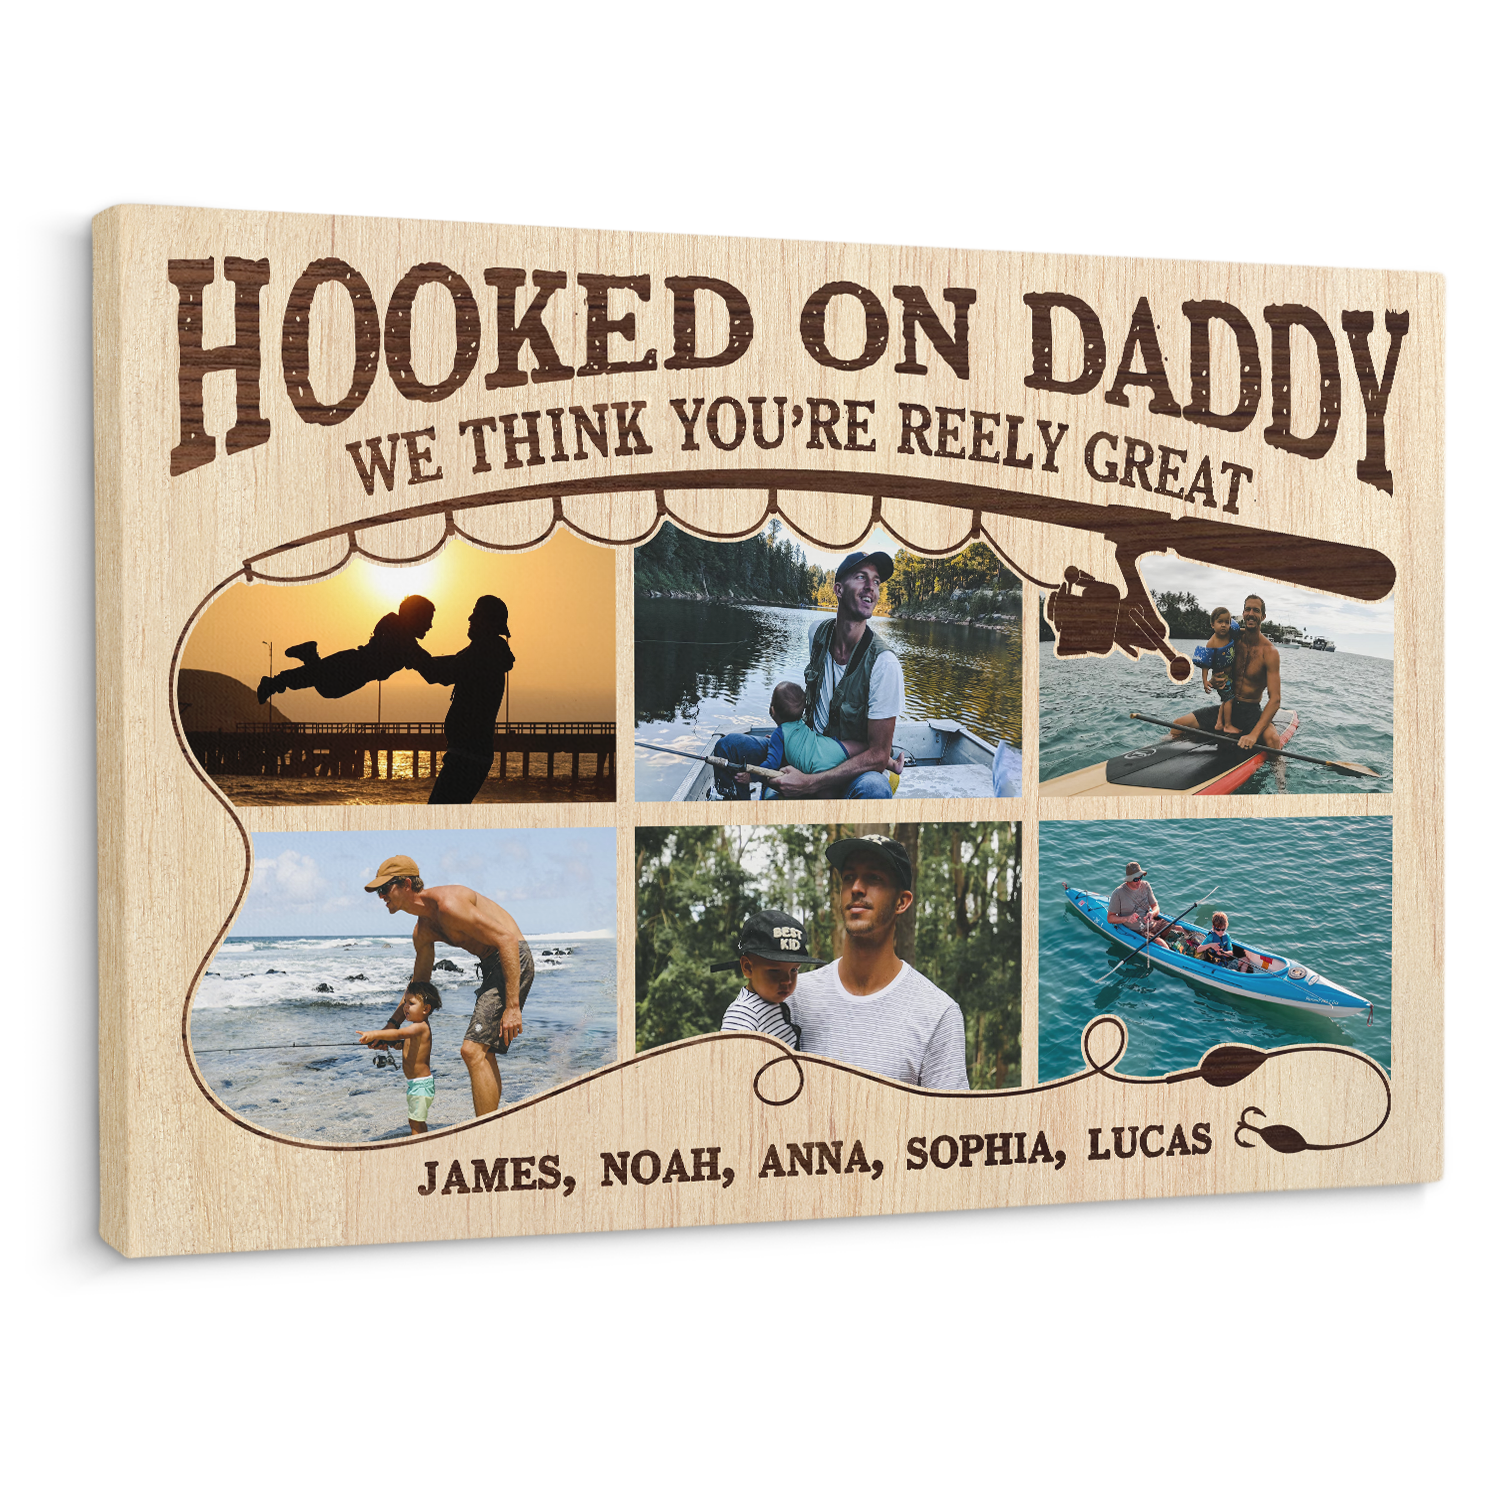 Hooked on Daddy Canvas Print